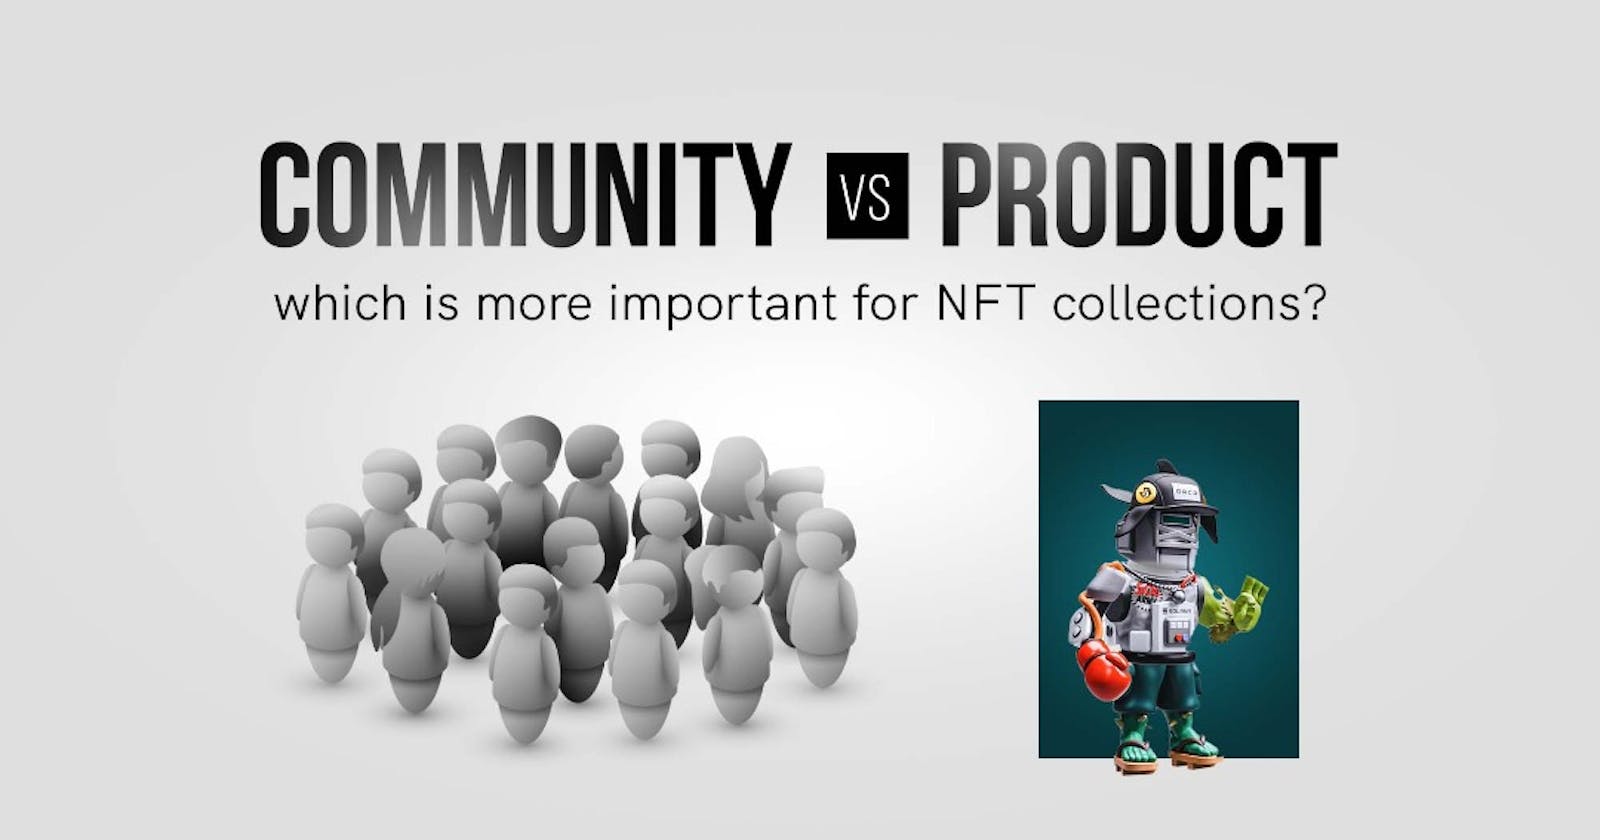 Community vs product, which is more important for NFT collections?